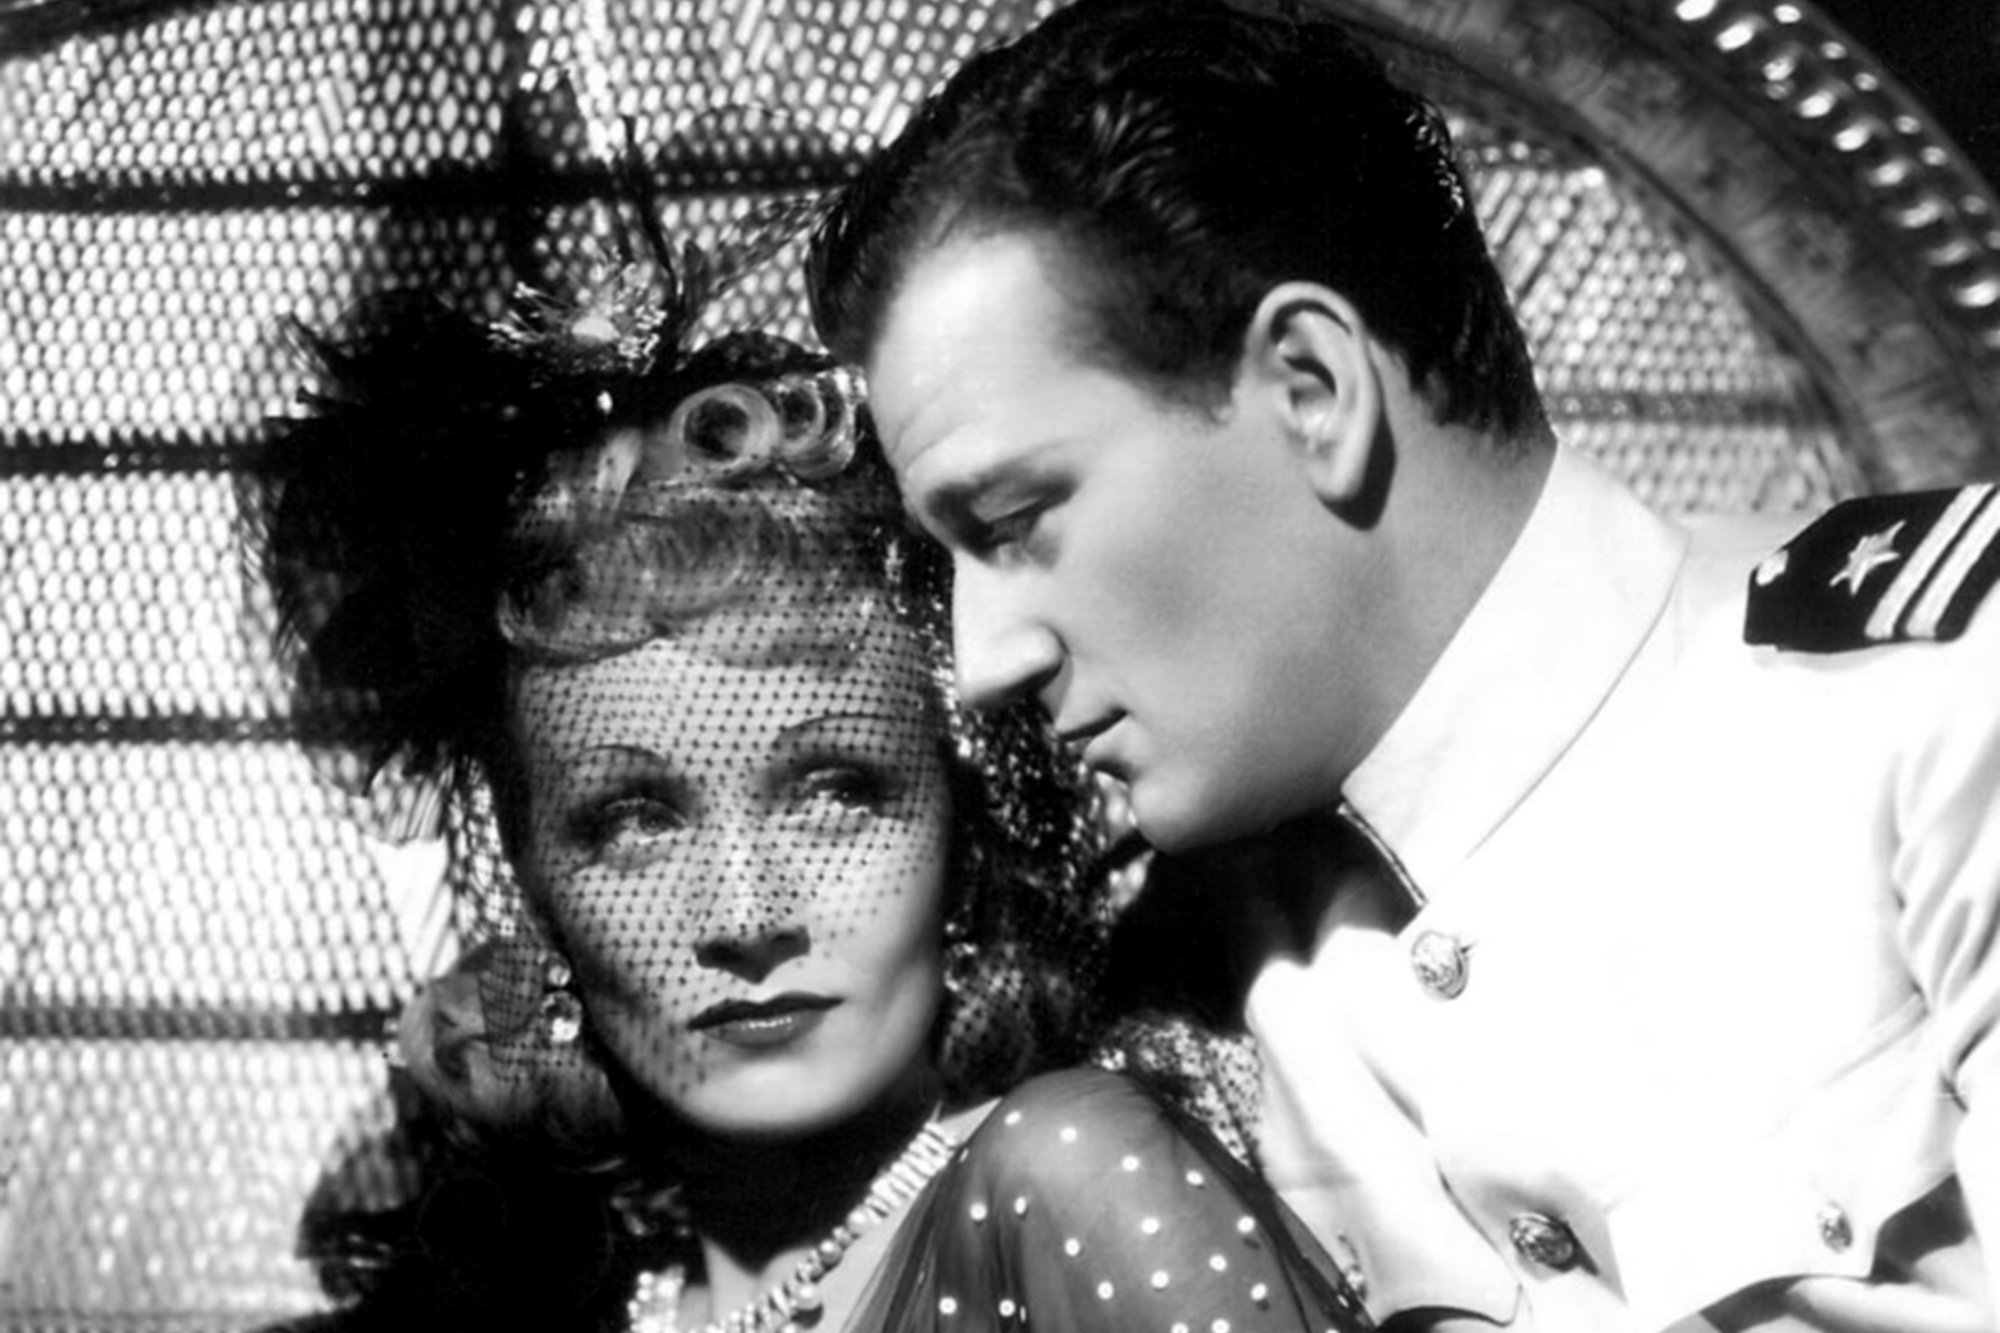 Marlene Dietrich and John Wayne looking in one another's eyes on the set of 'Seven Sinners'